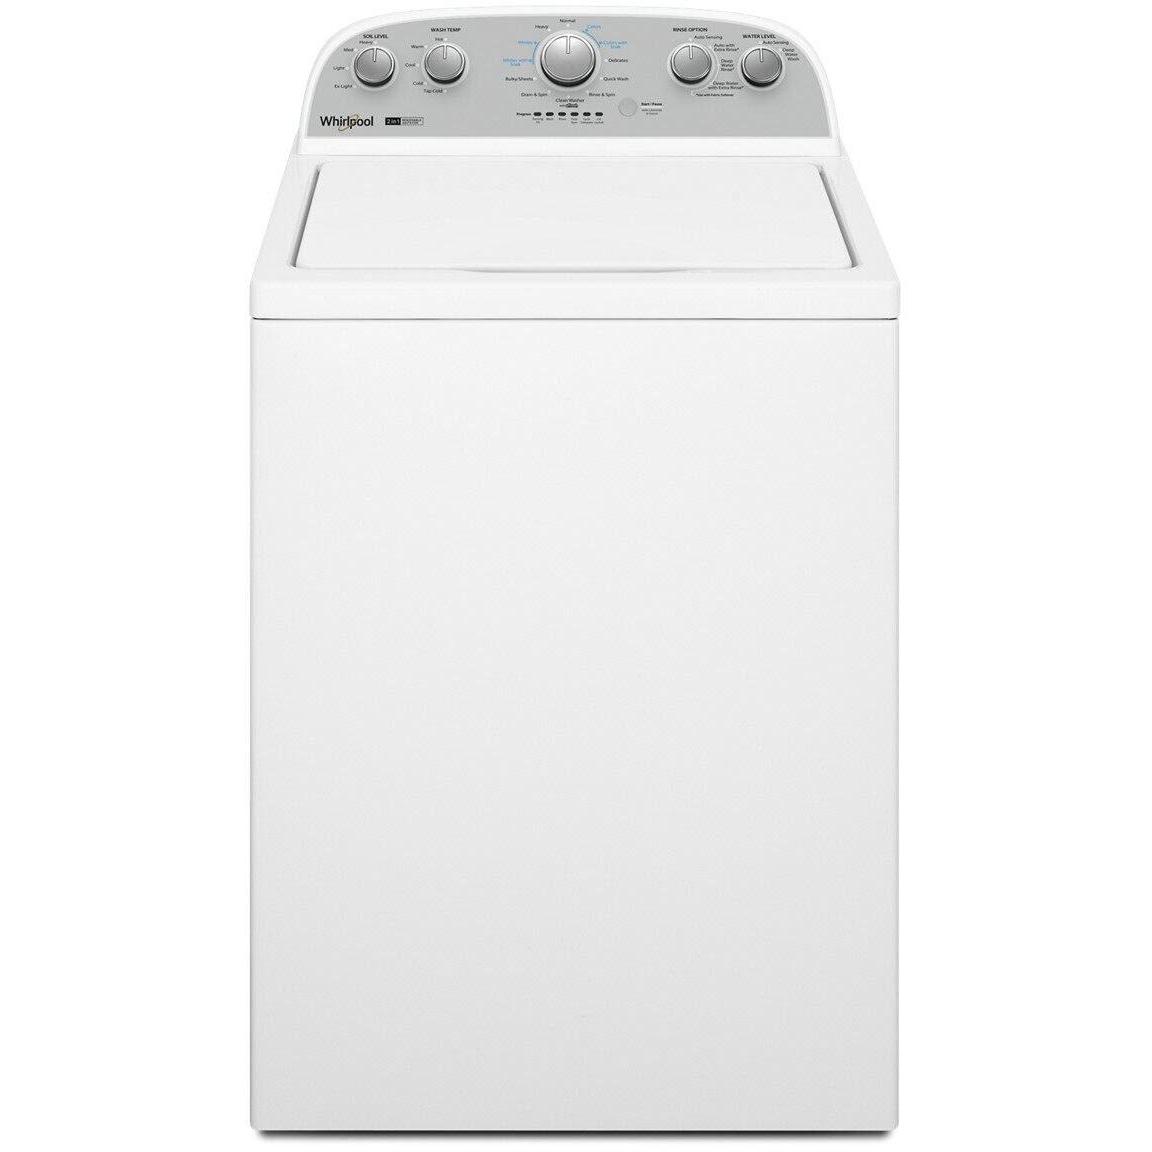 4.4 - 4.5 cu. ft. Top Loading Washer WTW4957PW IMAGE 1